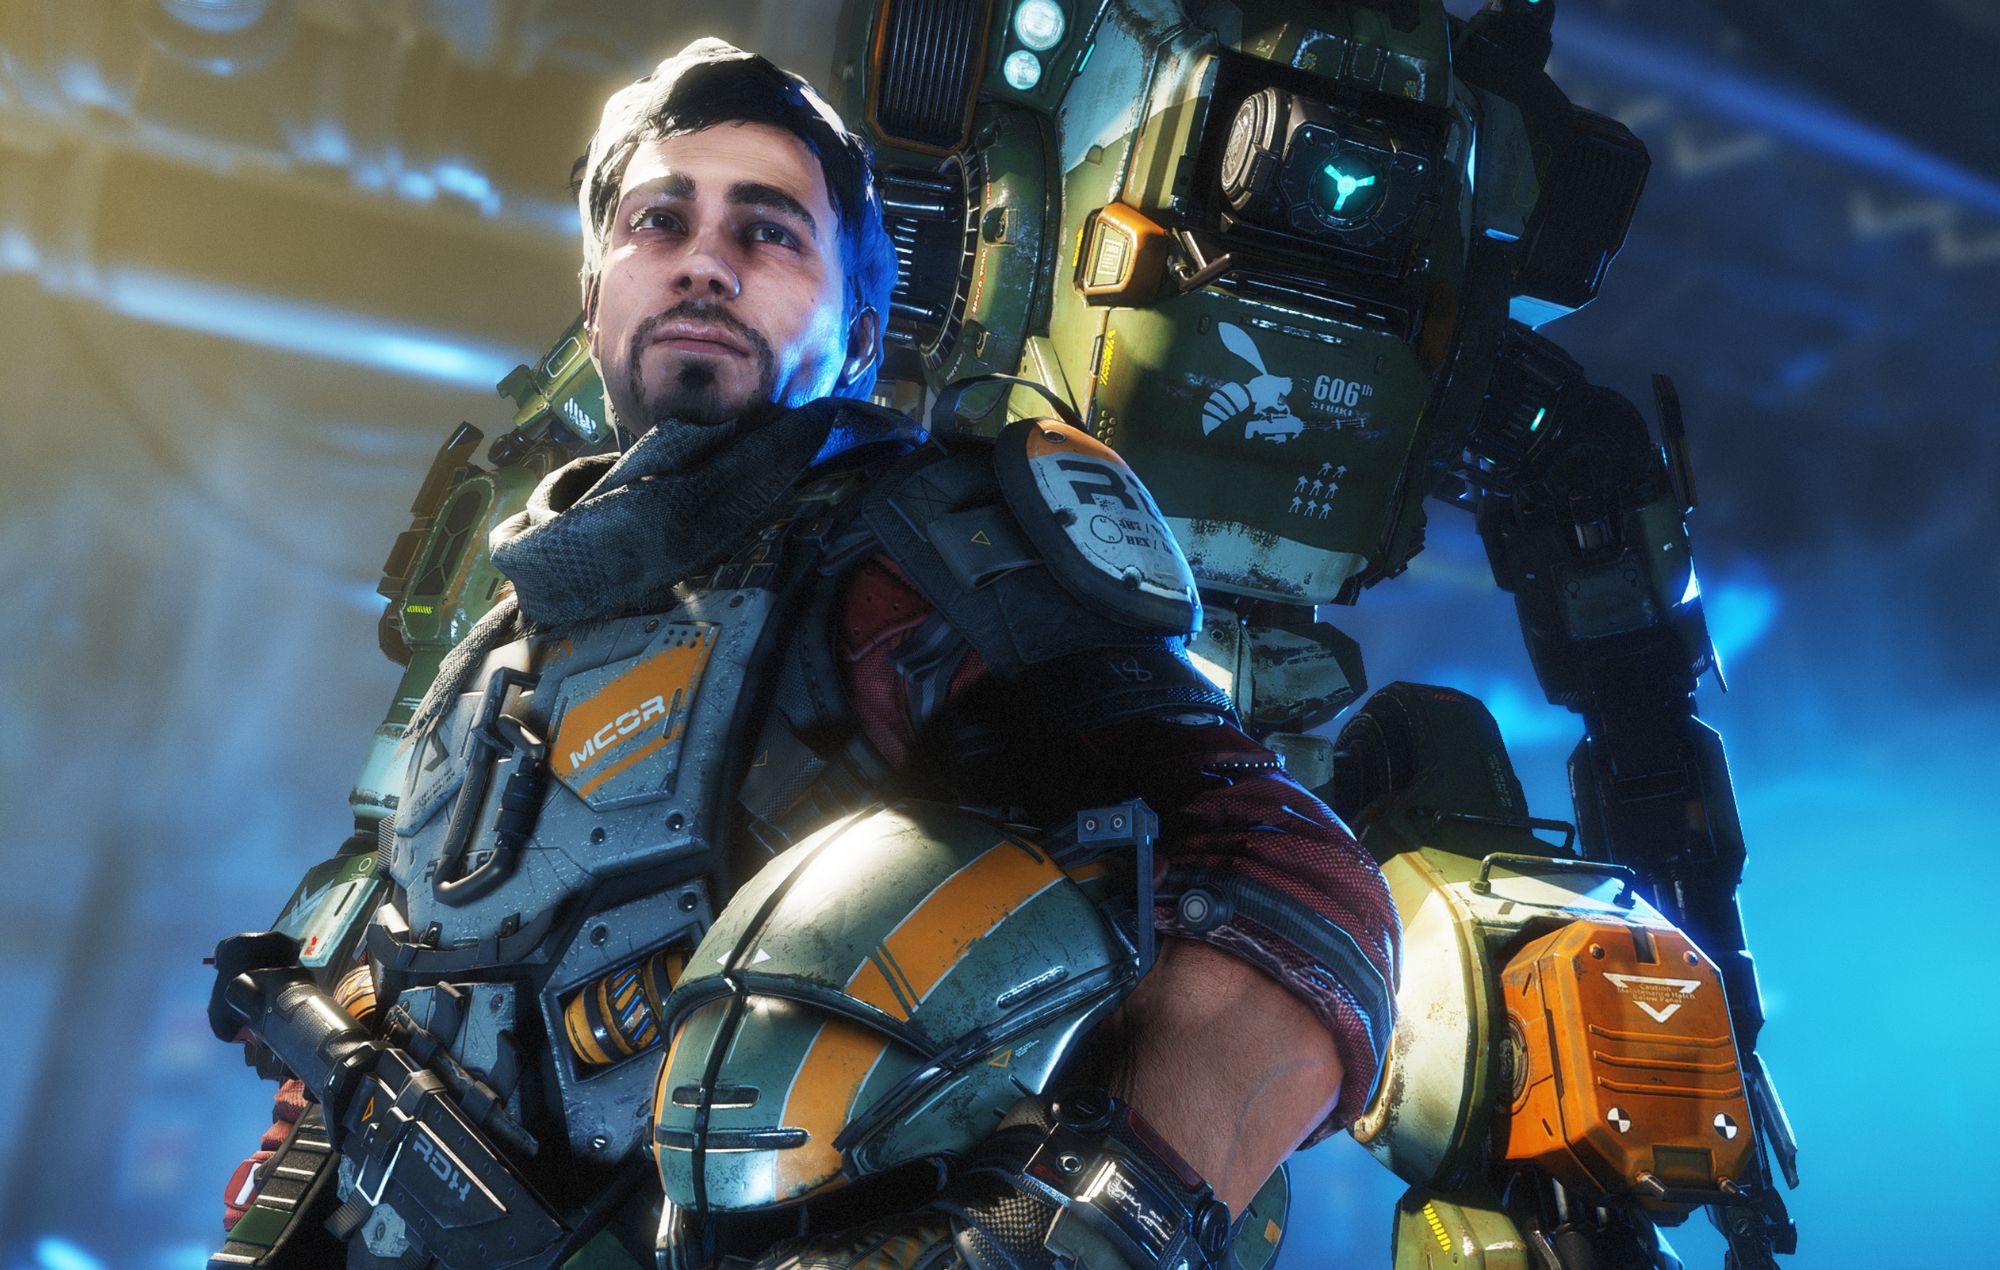 Titanfall 2 is a must-play ahead of the Apex Legends single-player game